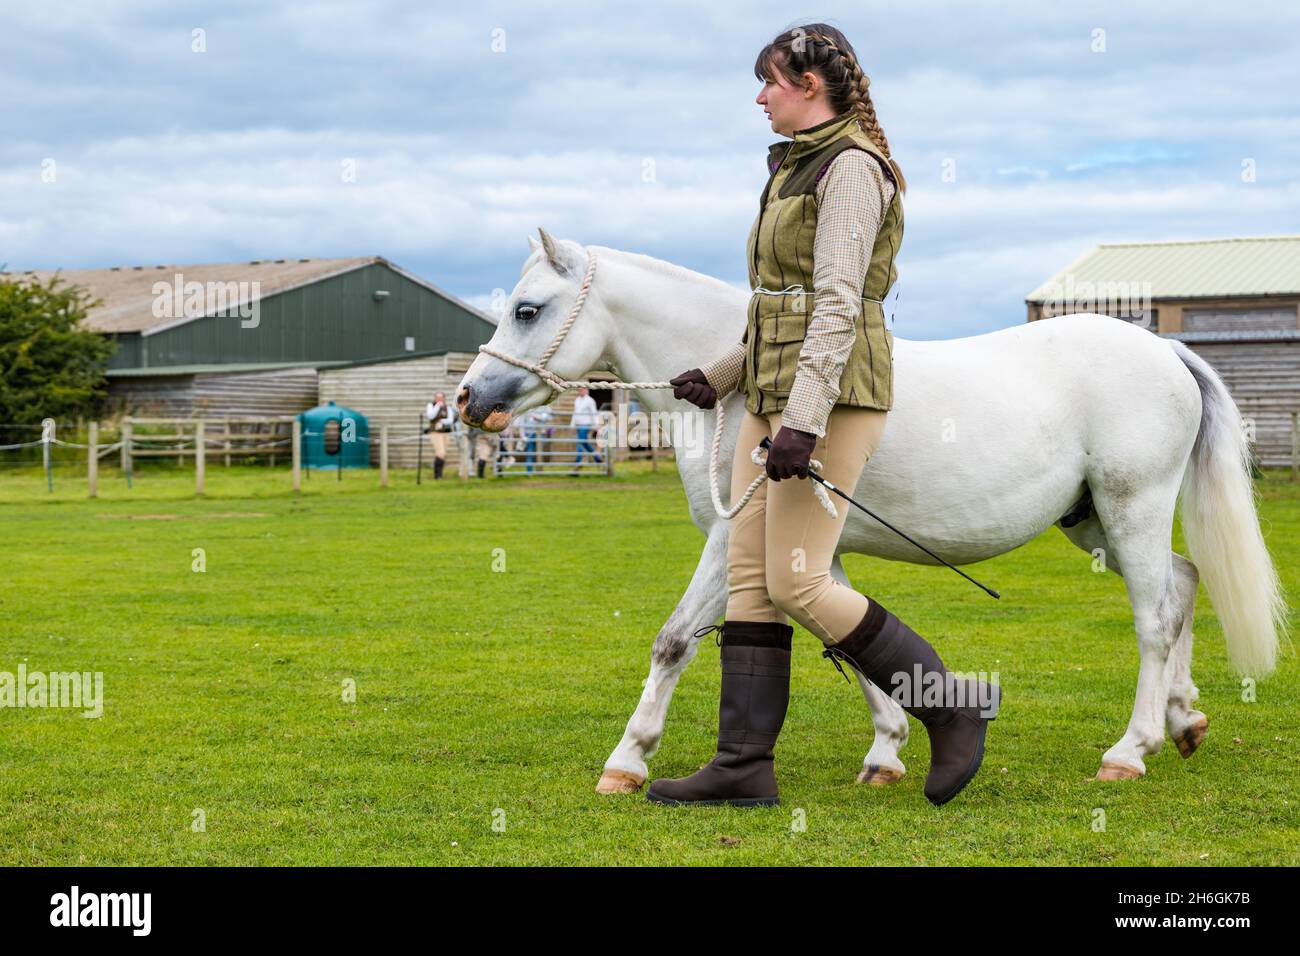 Summer horse show: a woman leading a pony in a field, East Lothian, Scotland, UK Stock Photo